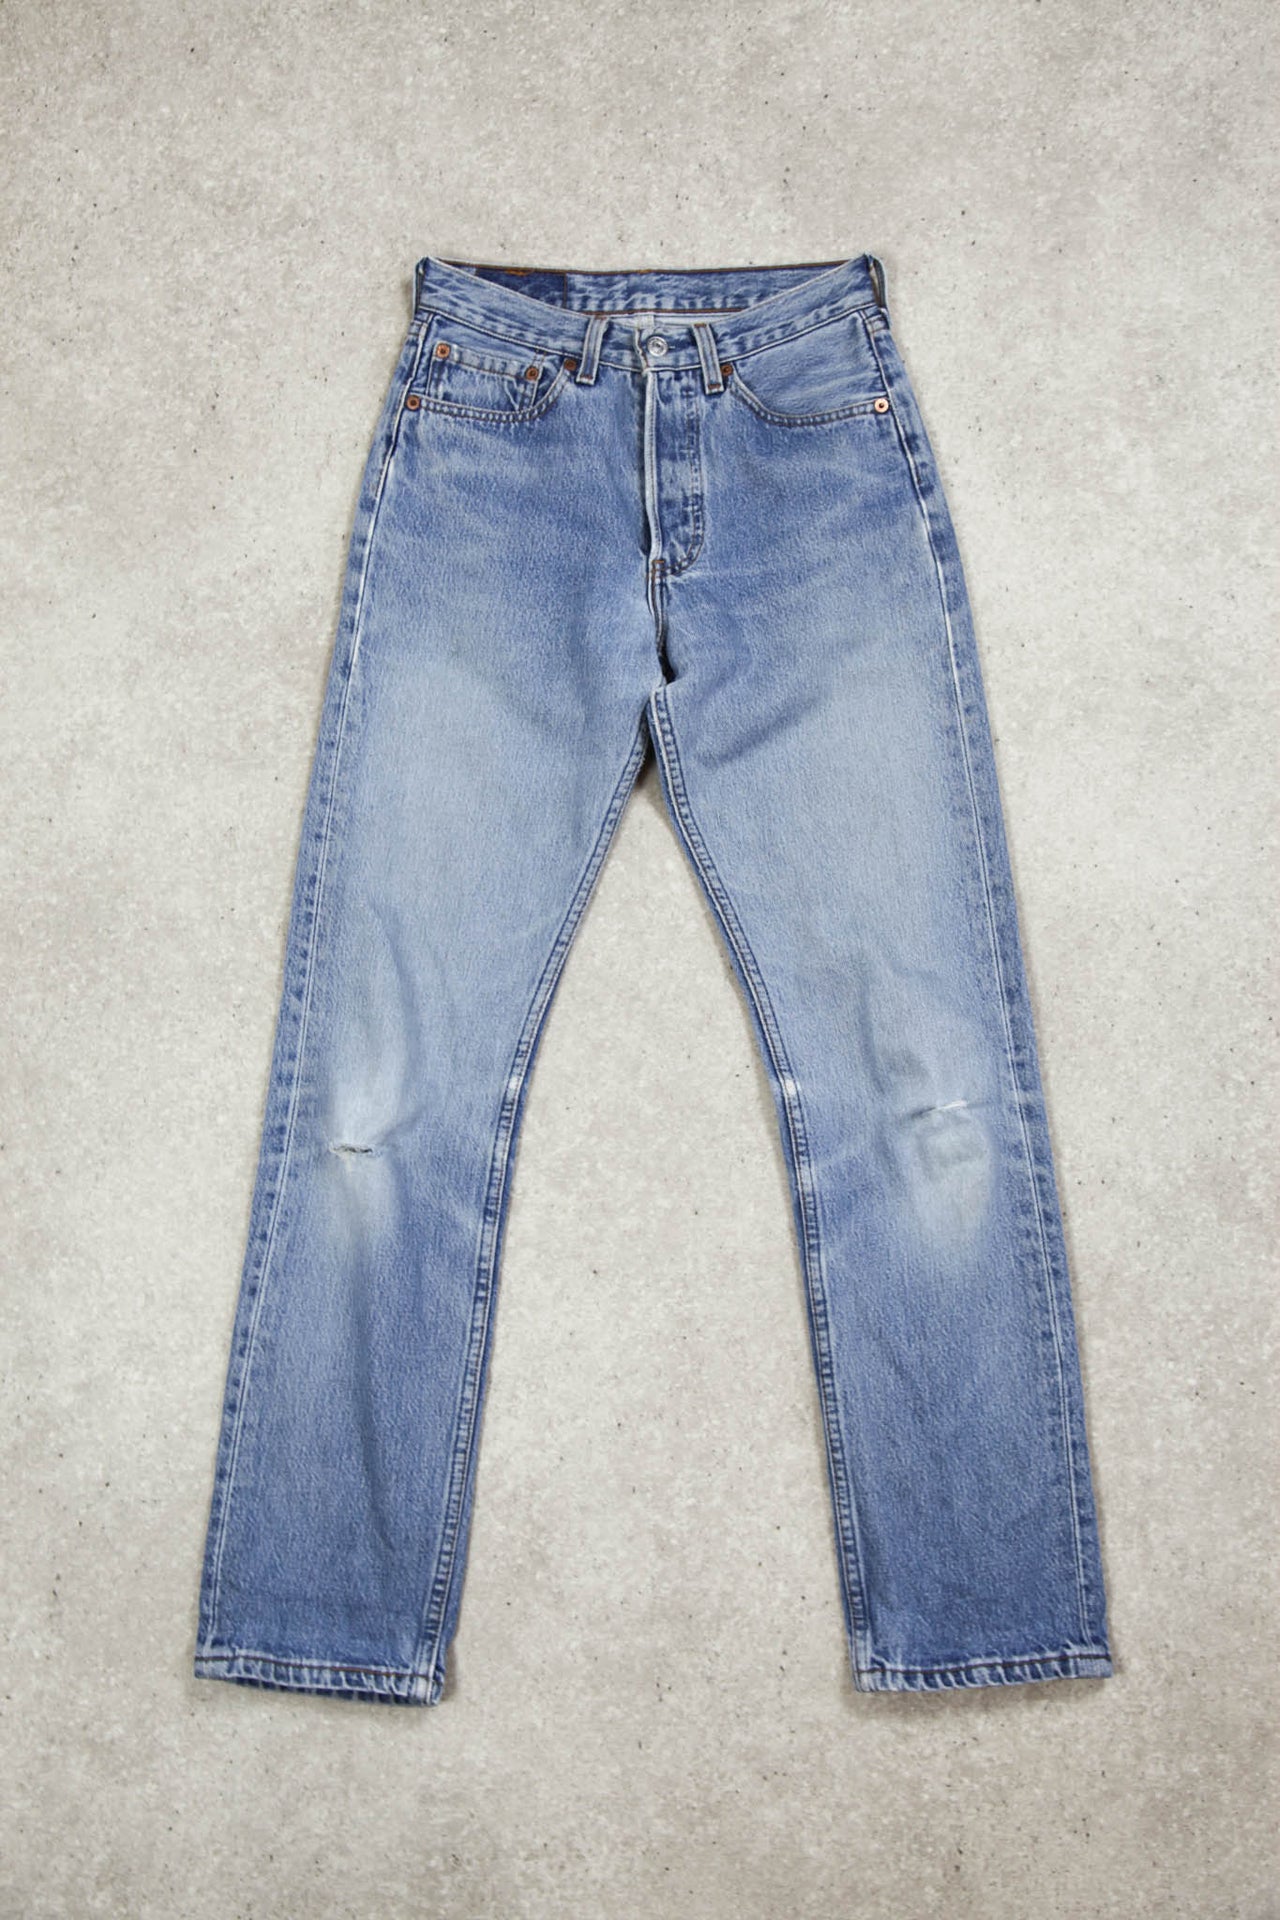 Made in USA Levi's 501 Light Wash Jeans (W24 L30)